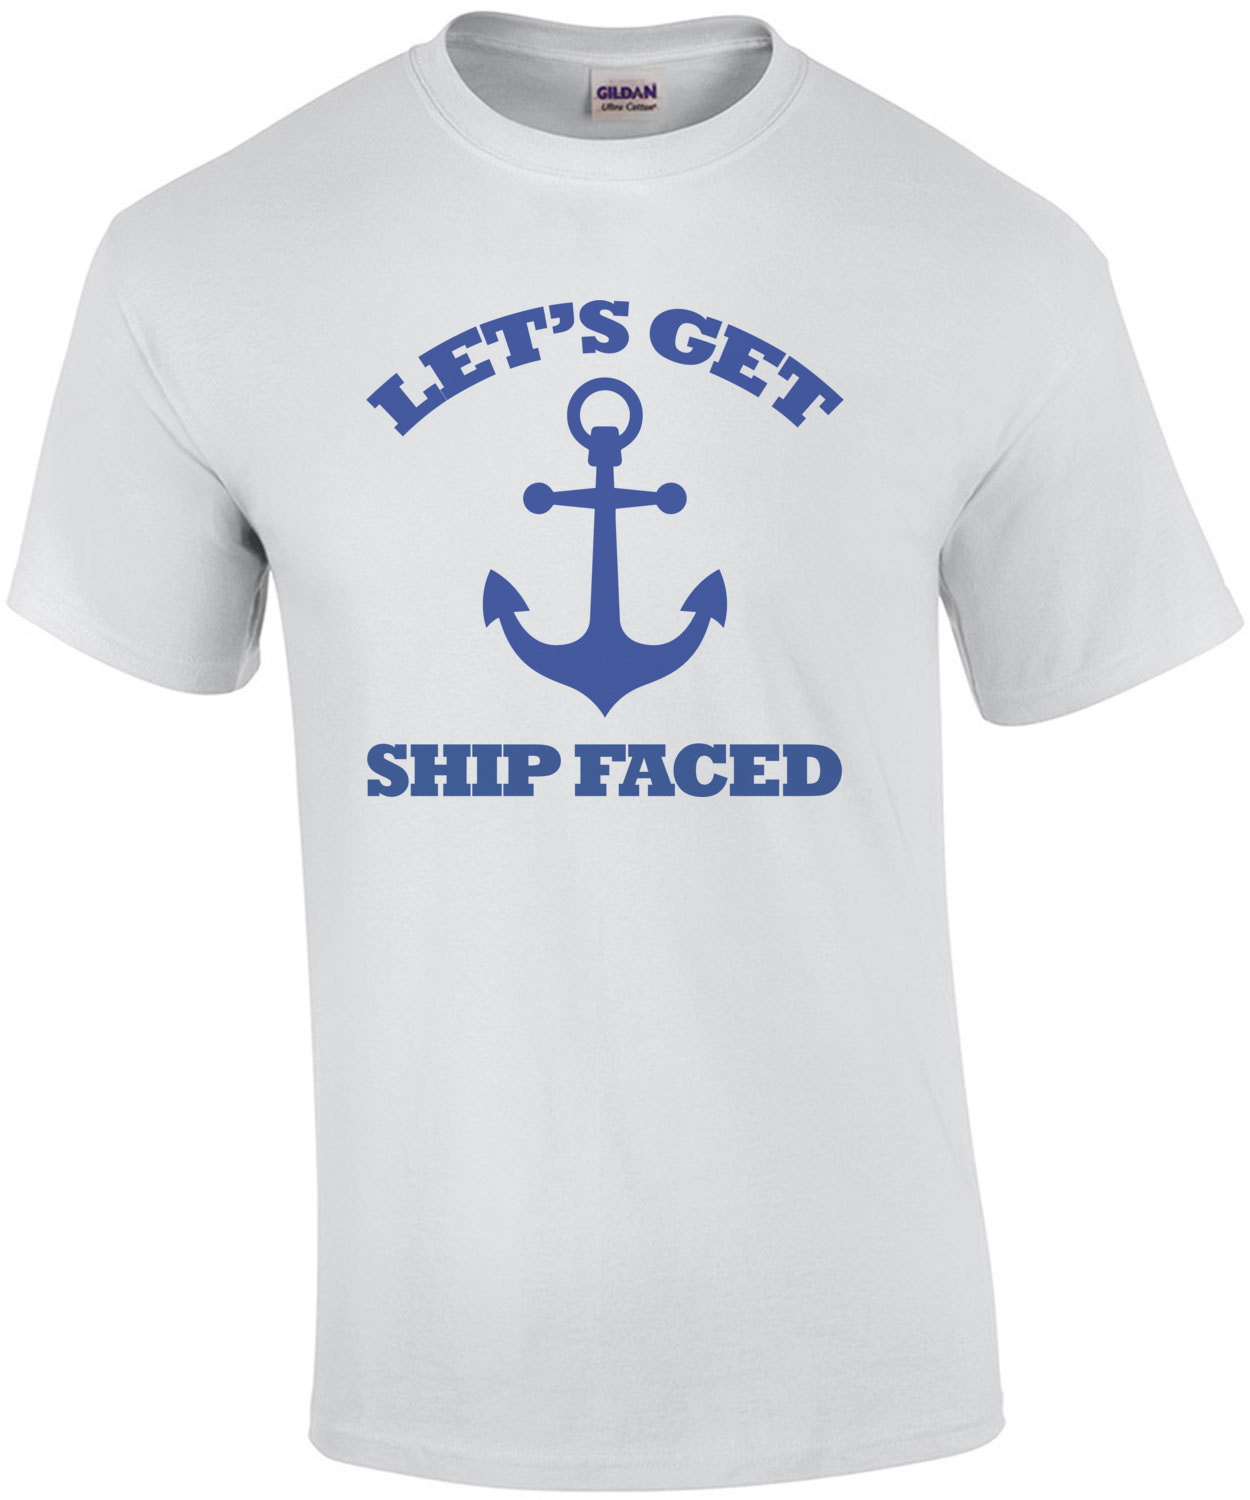 Lets get ship faced - funny boating t-shirt